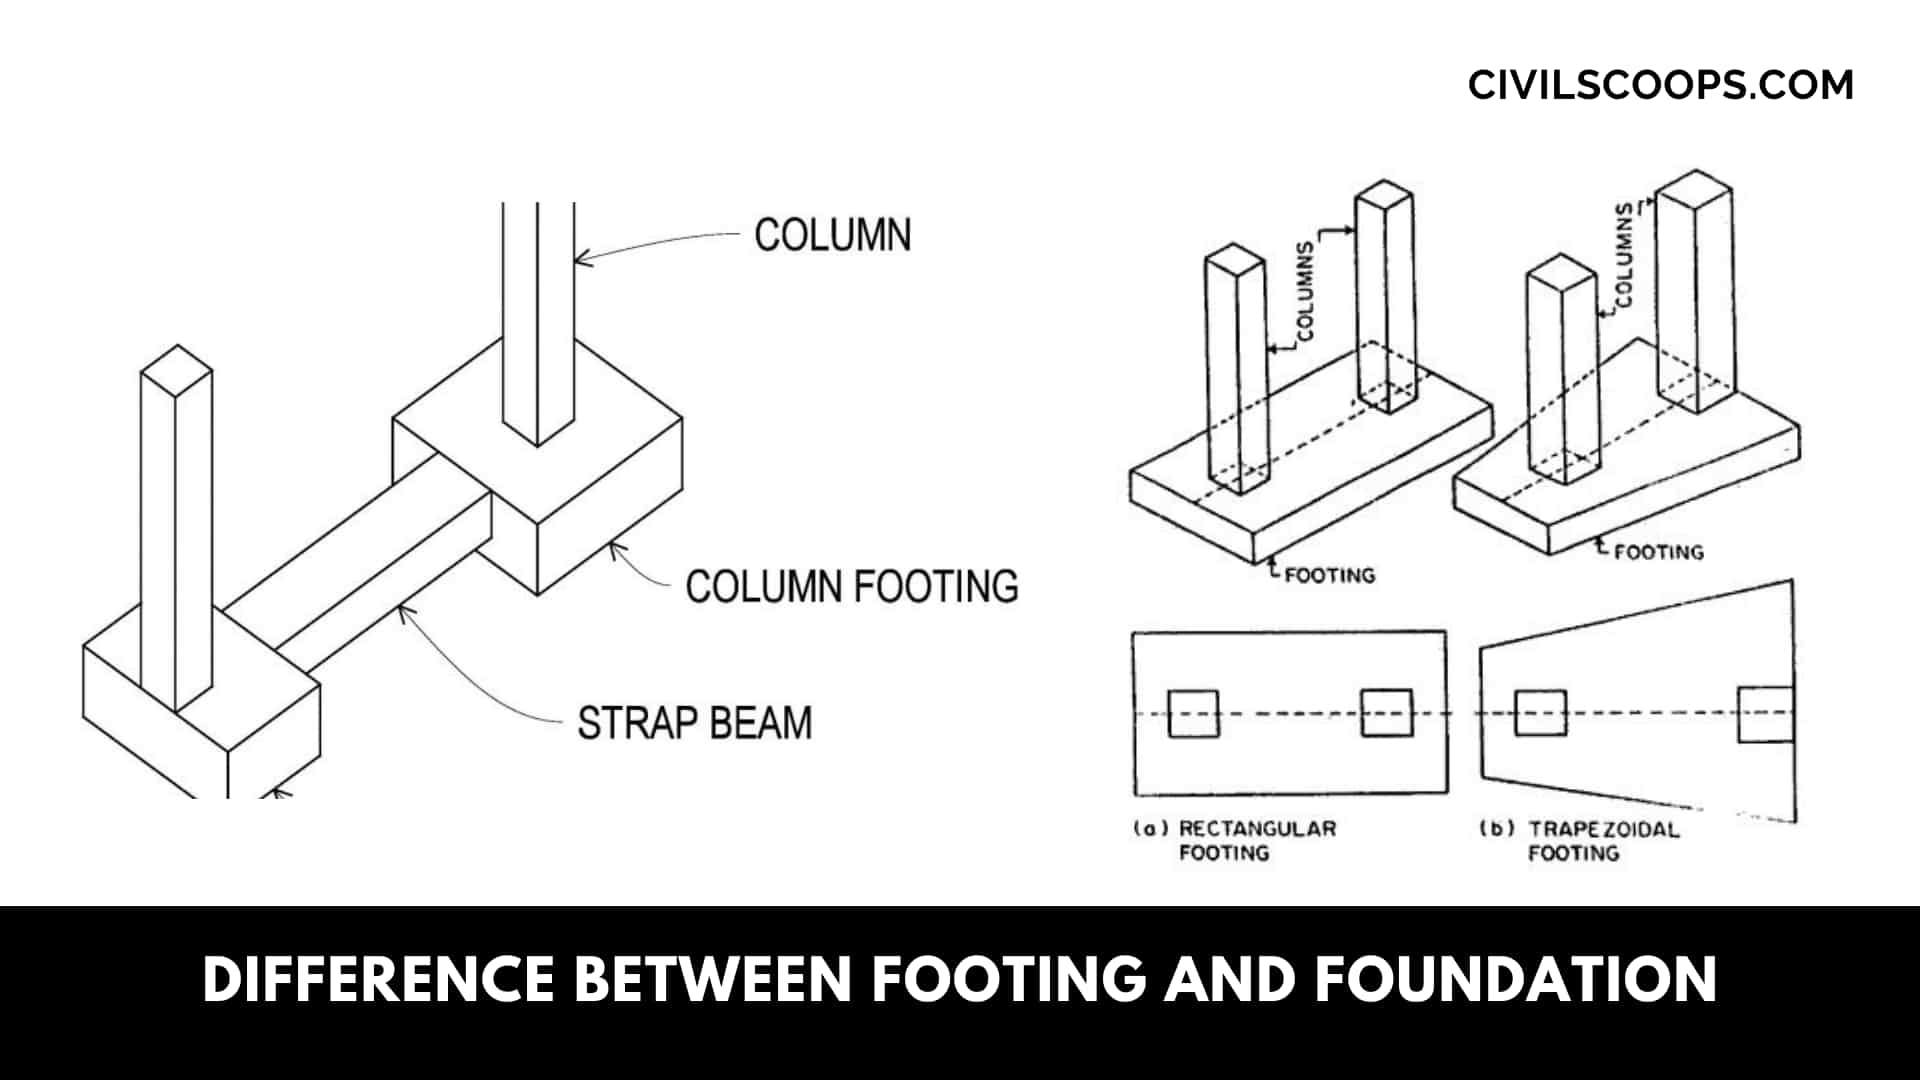 Difference Between Footing and Foundation